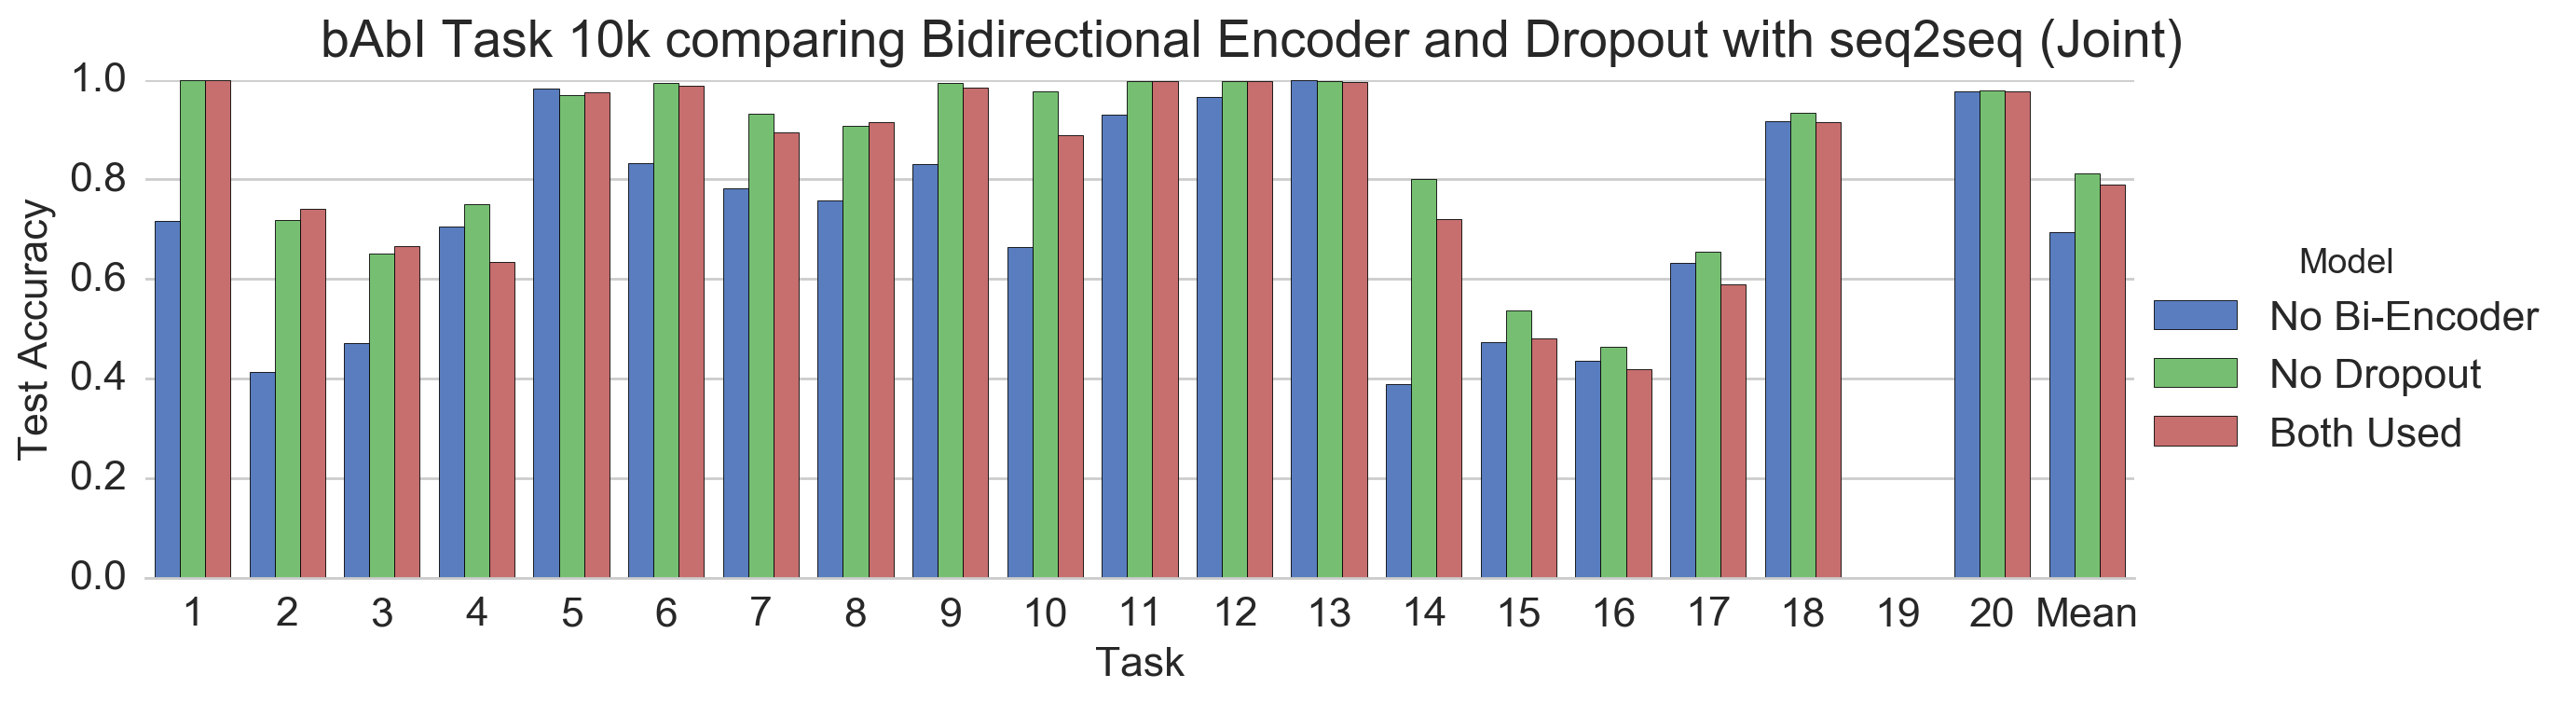 bAbI Task 10k comparing Bidirectional Encoder and Dropout with seq2seq (Joint)